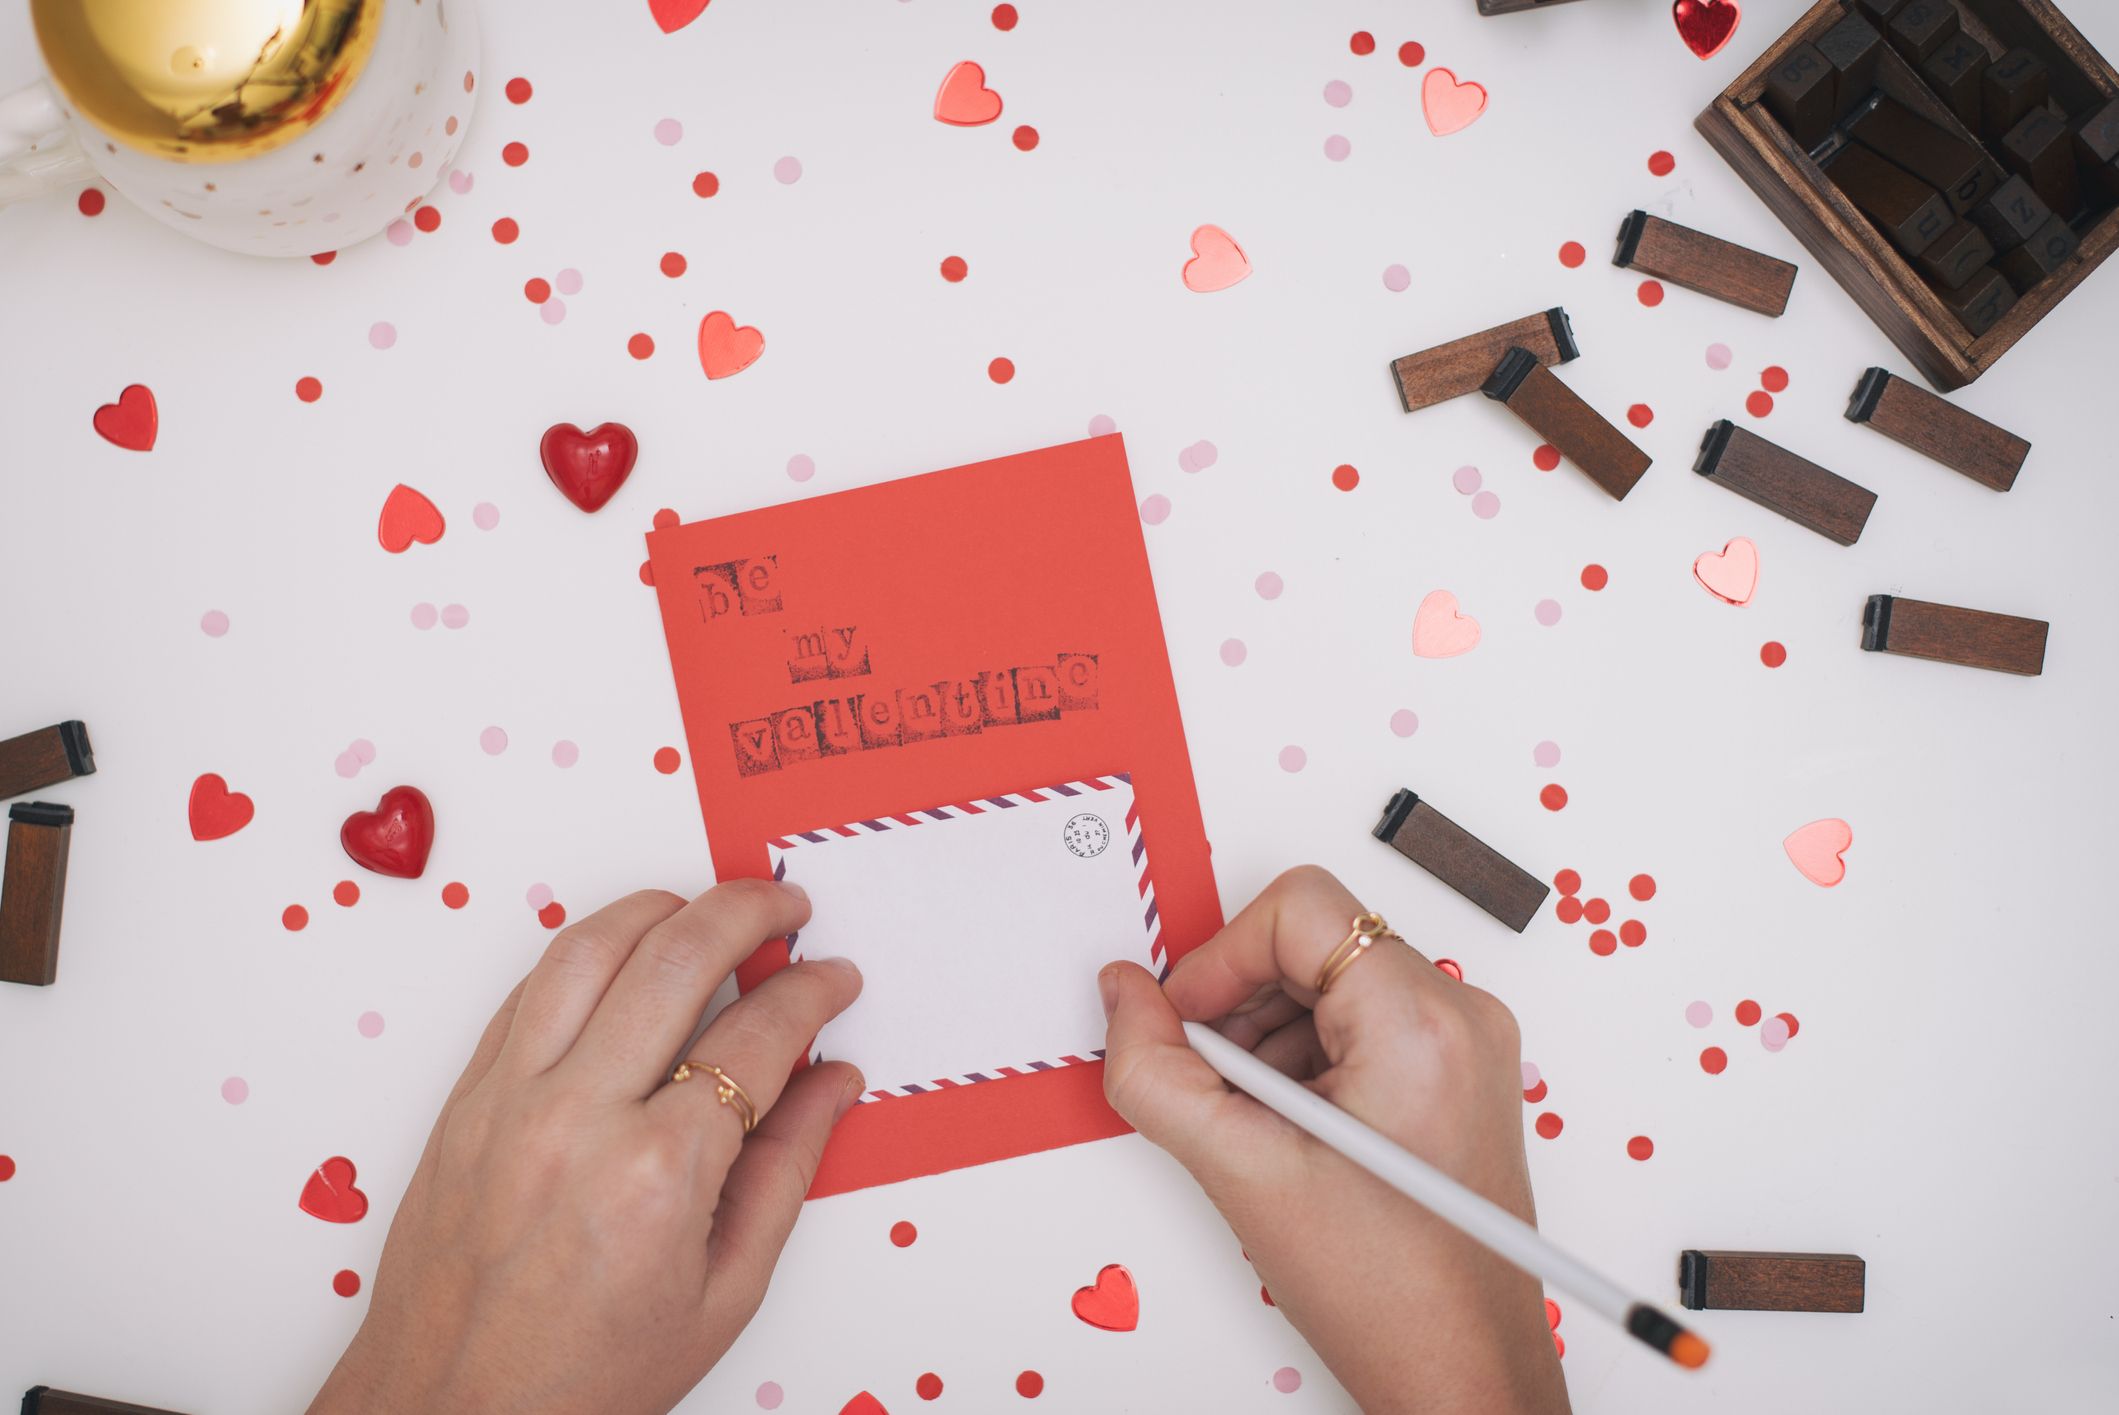 How To Write A Love Letter - Romantic Love Letter Ideas For Your Girlfriend  Or Boyfriend